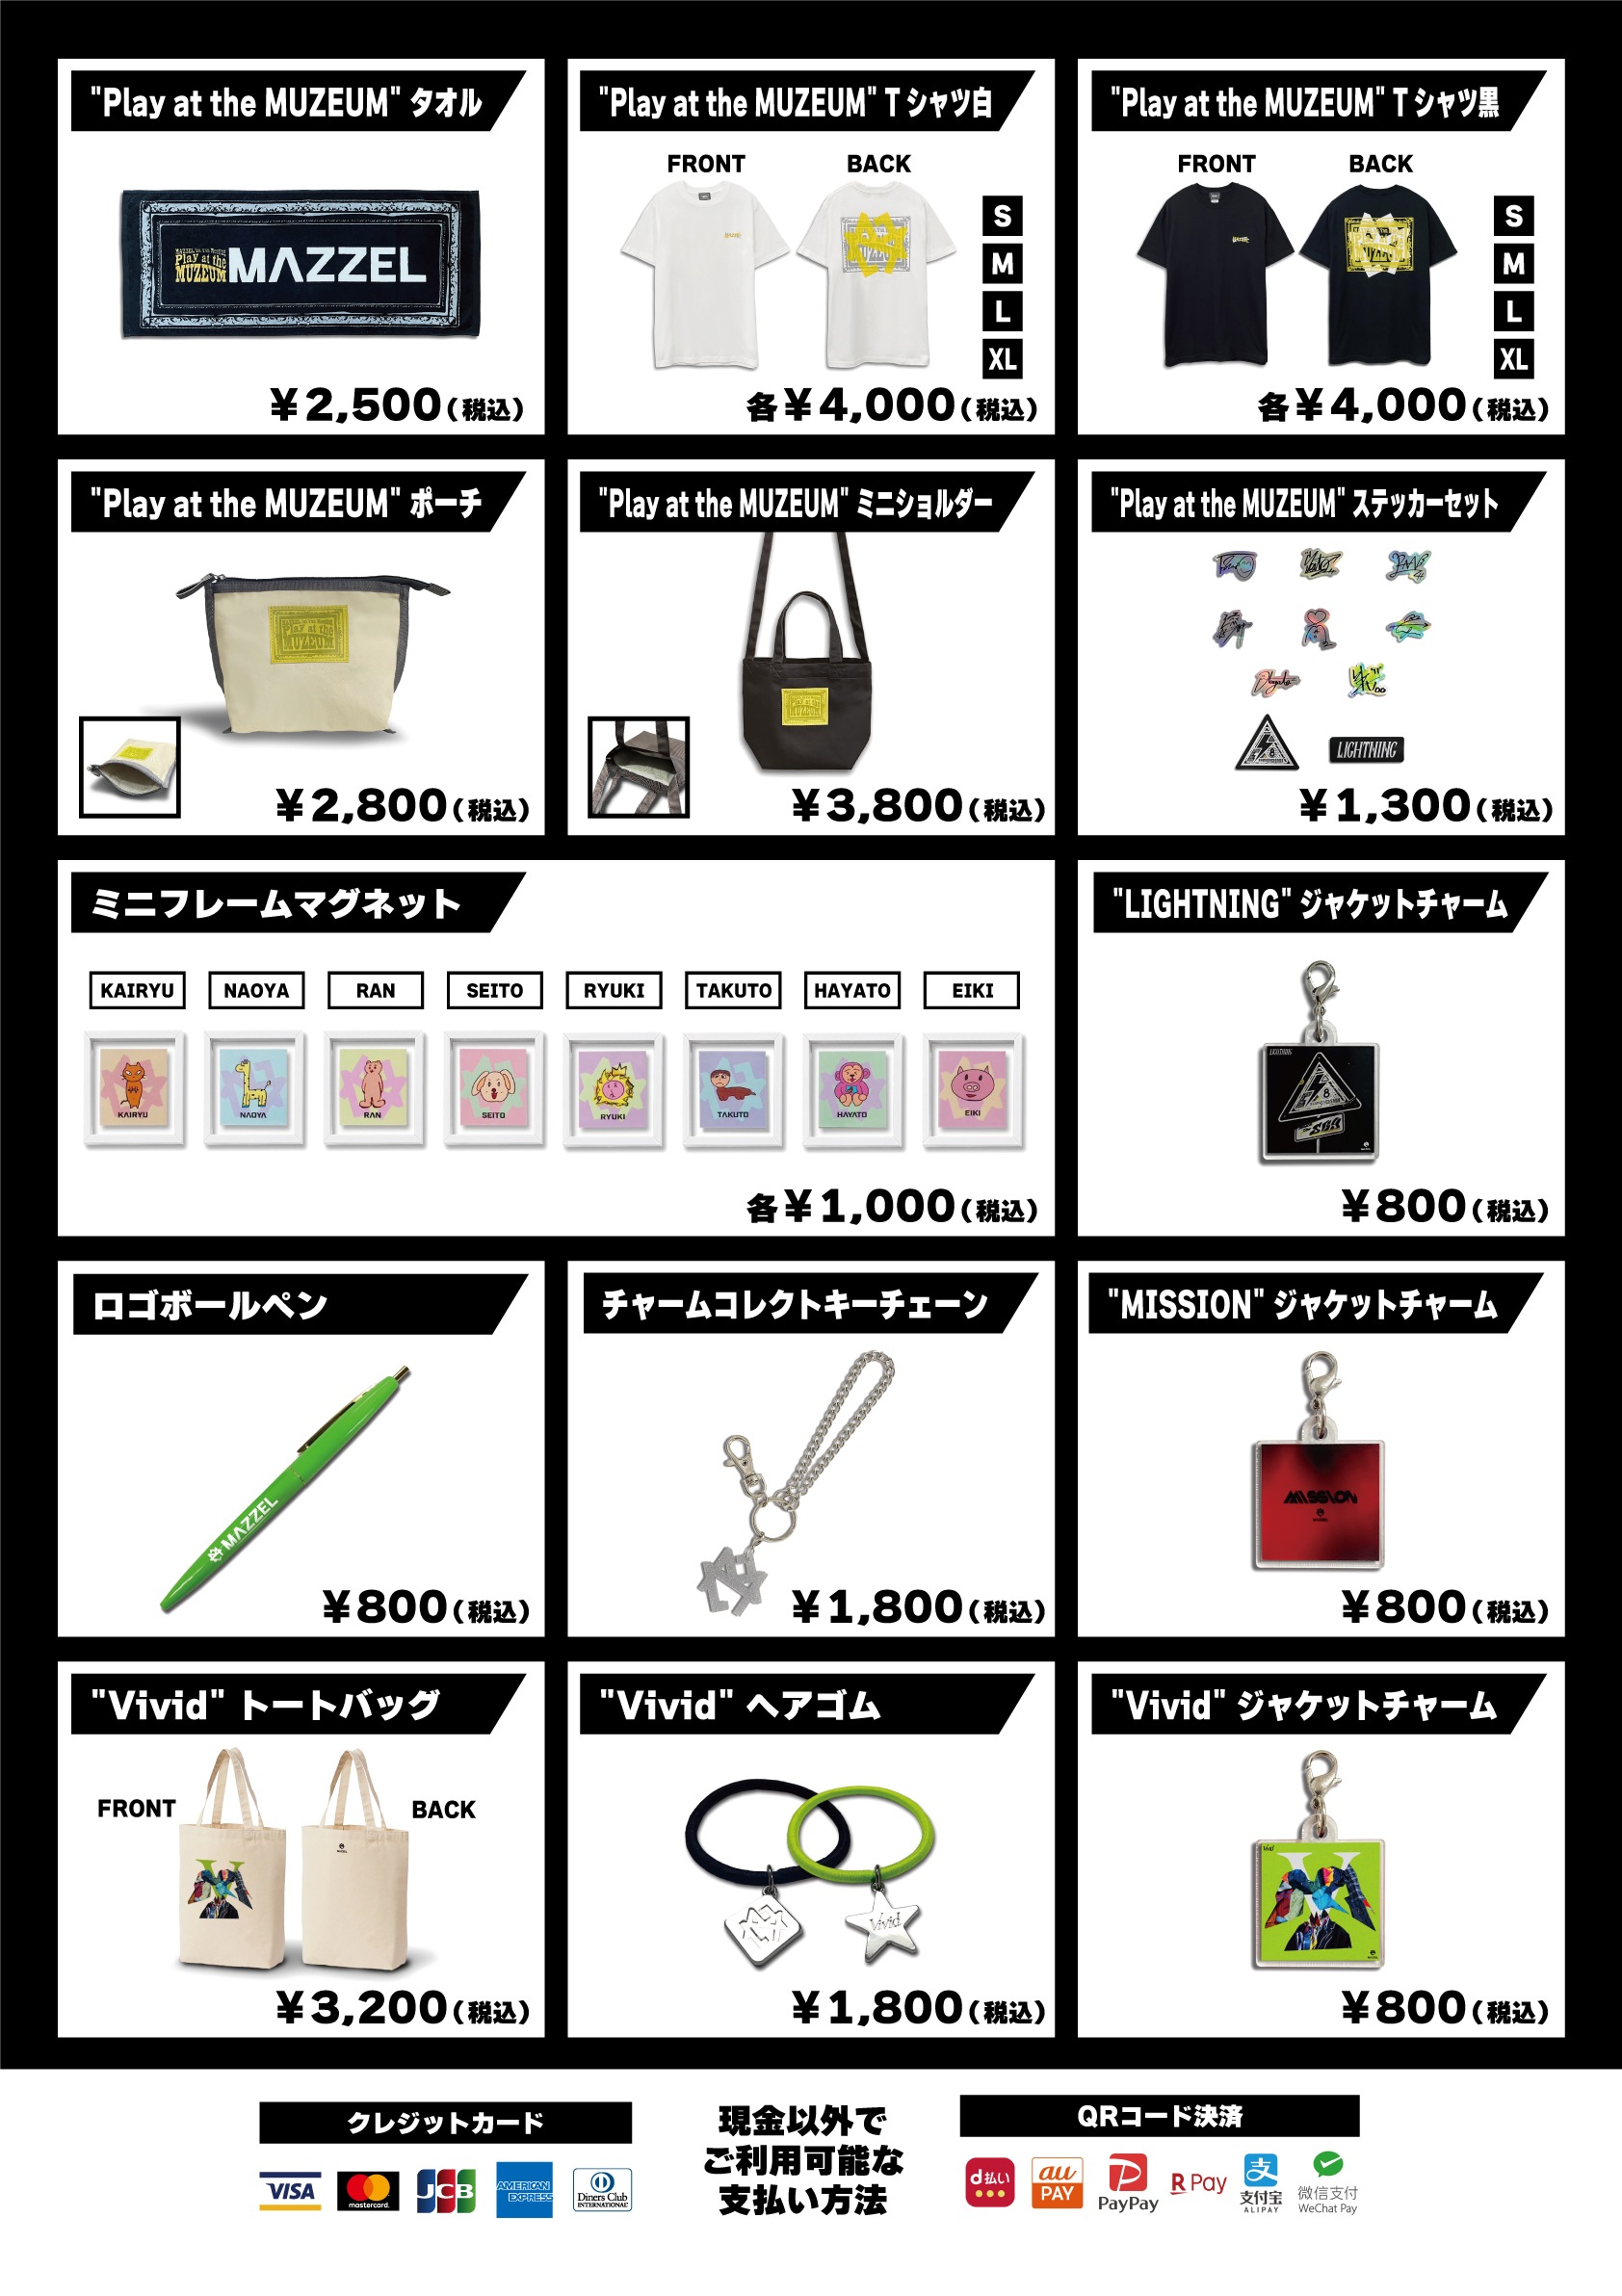 MAZZEL 1st Fan Meeting -Play at the MUZEUM-』会場グッズ販売 ...